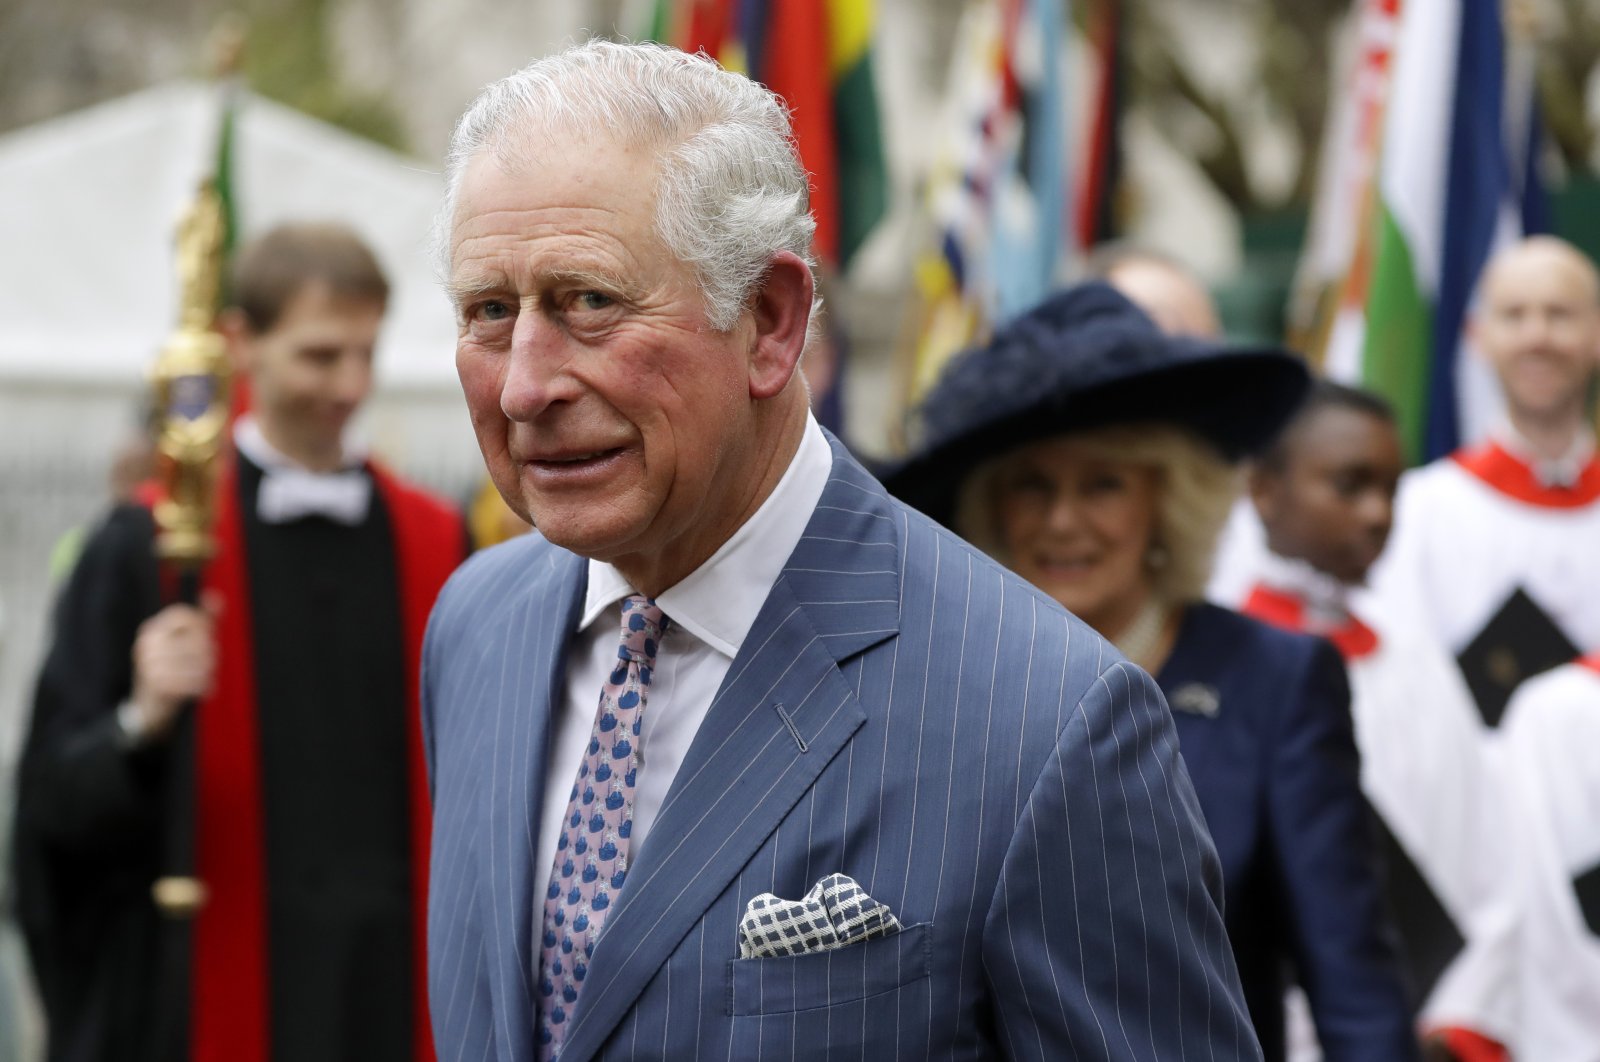 Britain's Prince Charles leaves after attending the annual Commonwealth Day service at Westminster Abbey, London, Monday, March 9, 2020. (AP Photo)